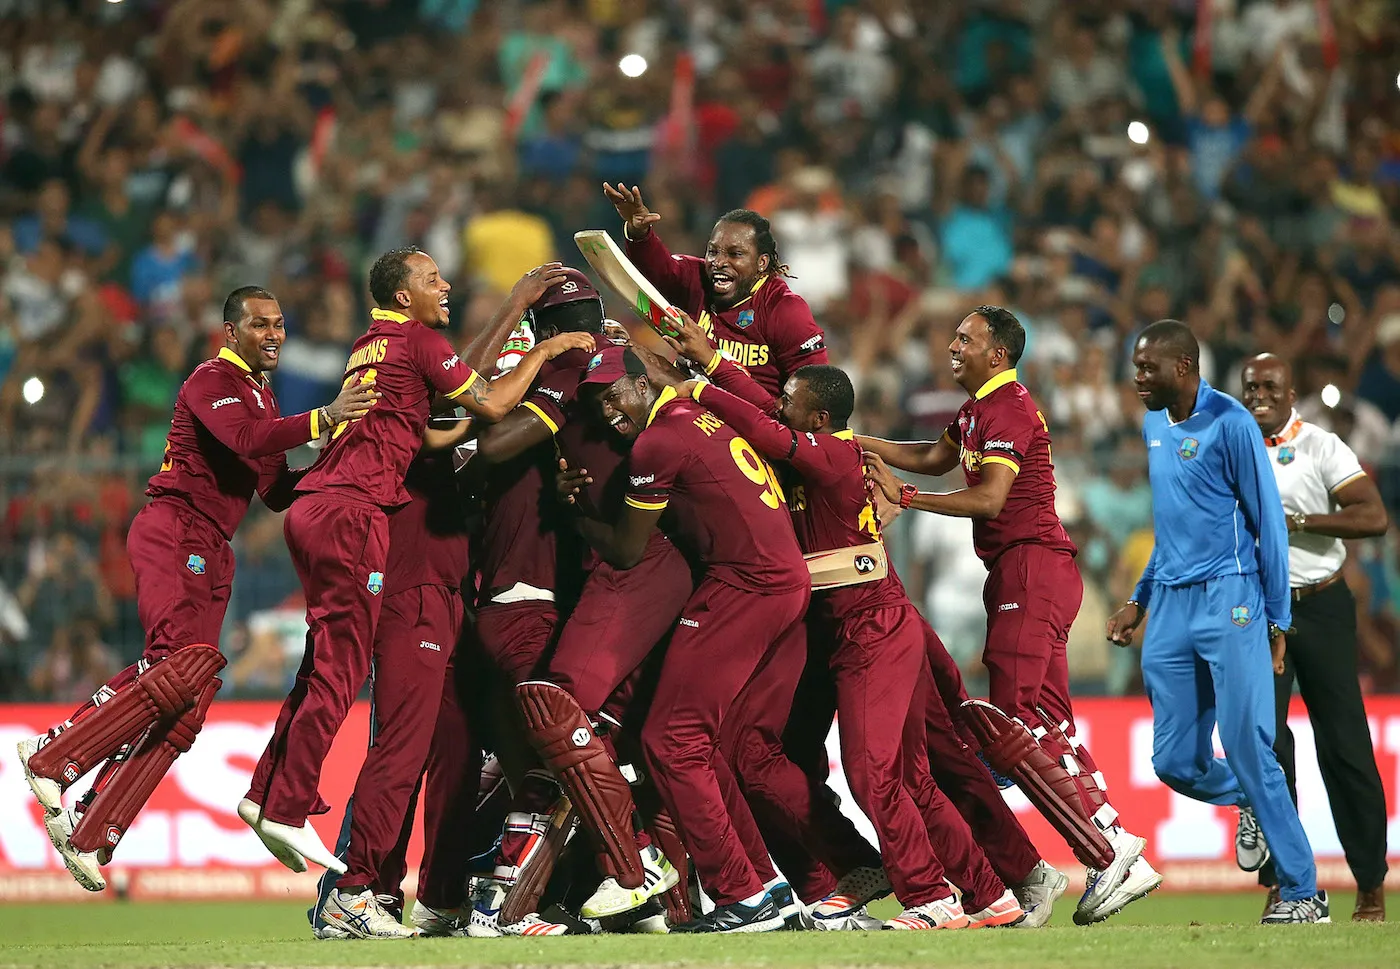 Remember the game: the last six balls of the 2016 T20 World Cup relived